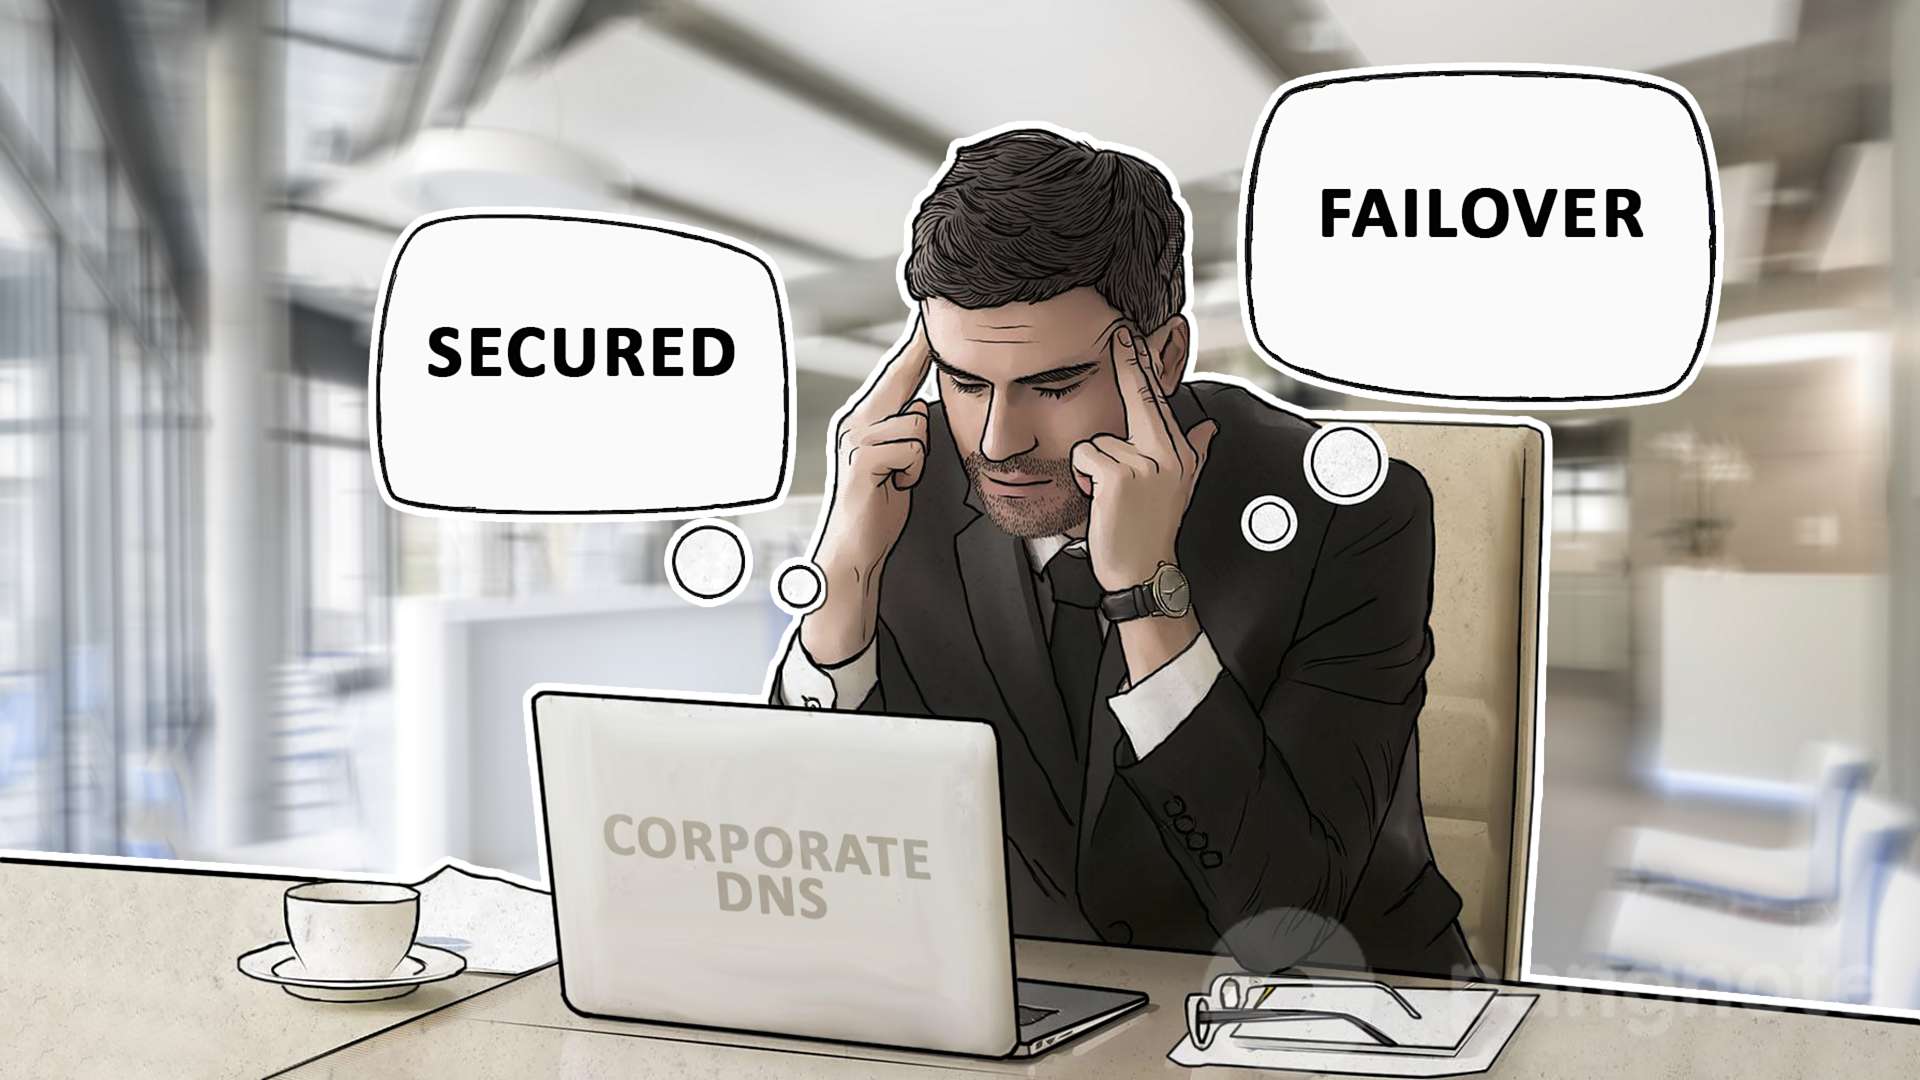 How to make a corporate DNS secured and failover?